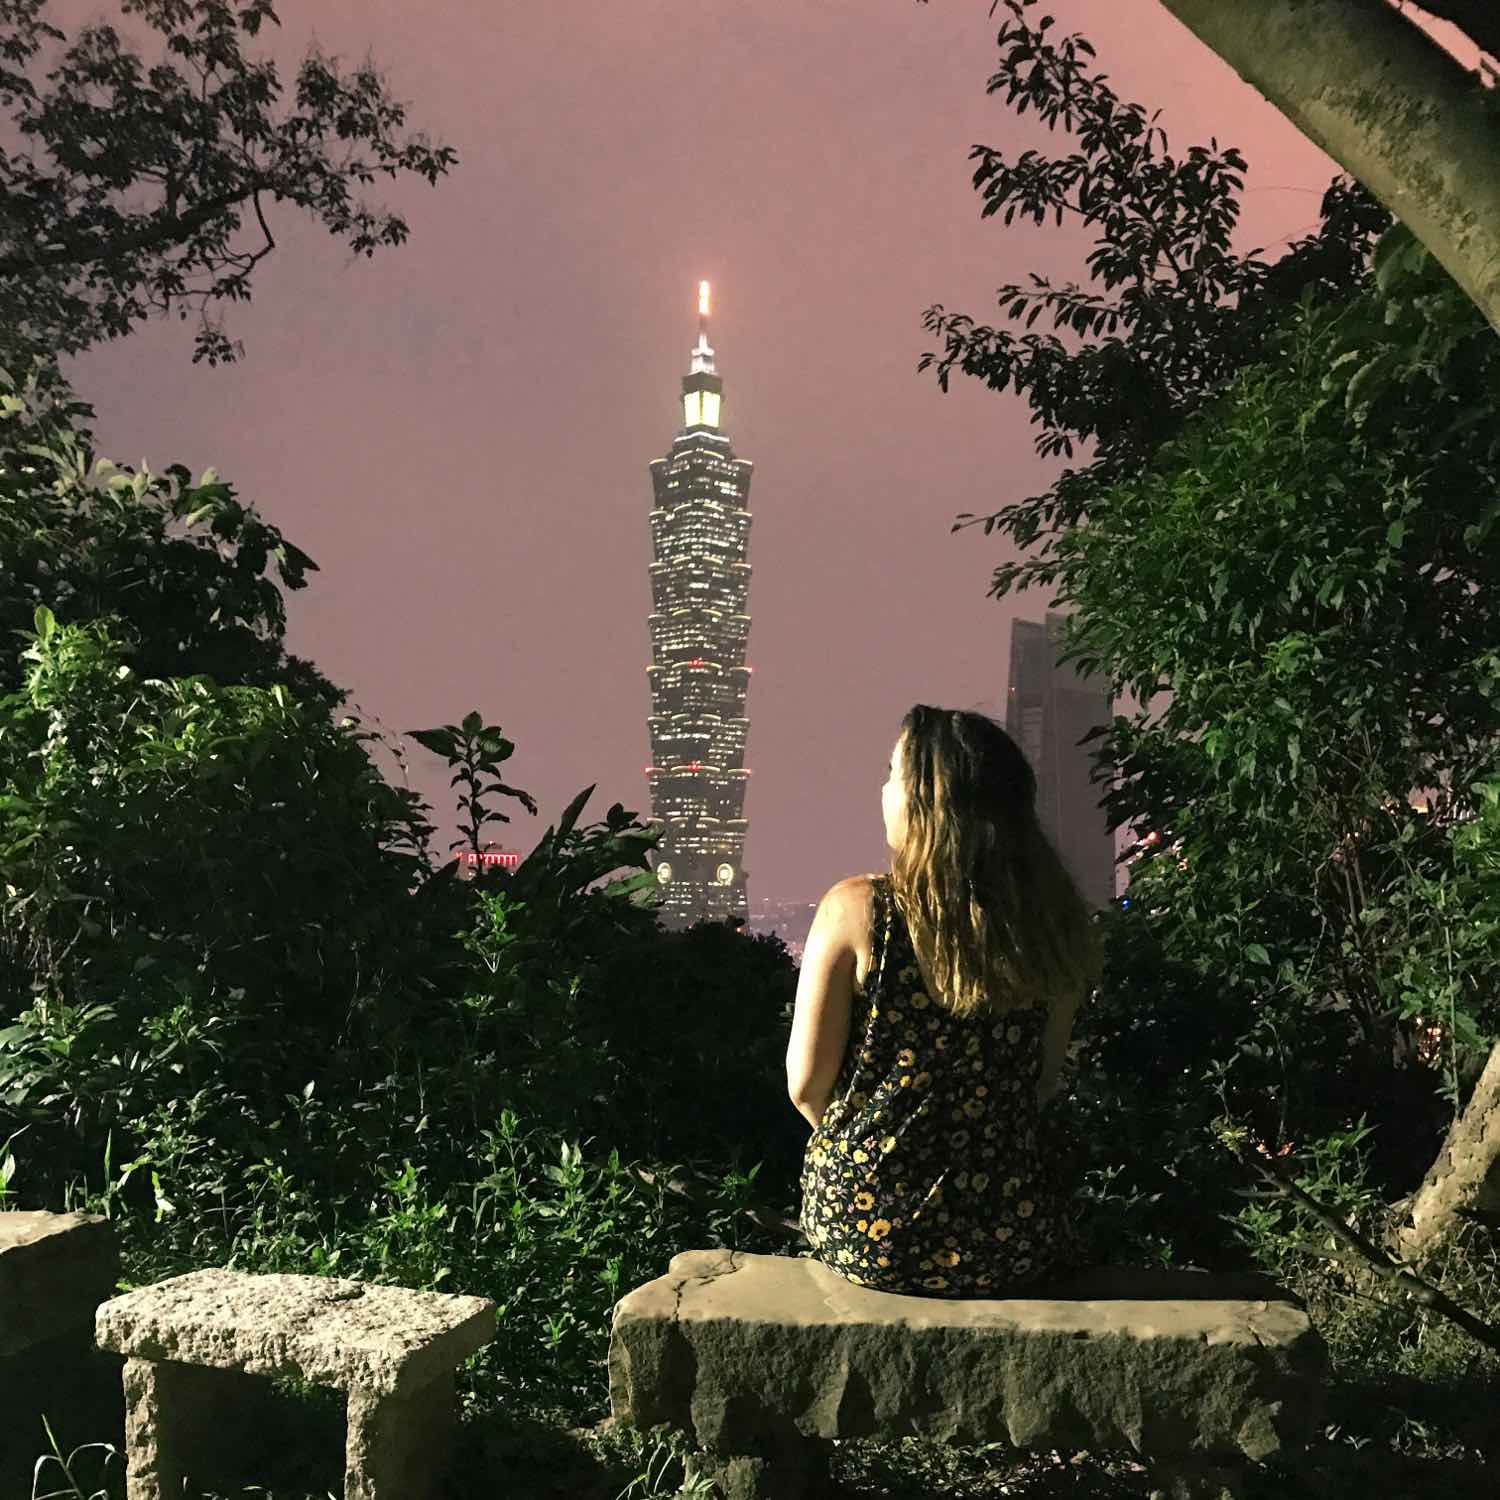 taipei 101 view from elephant mountain at night